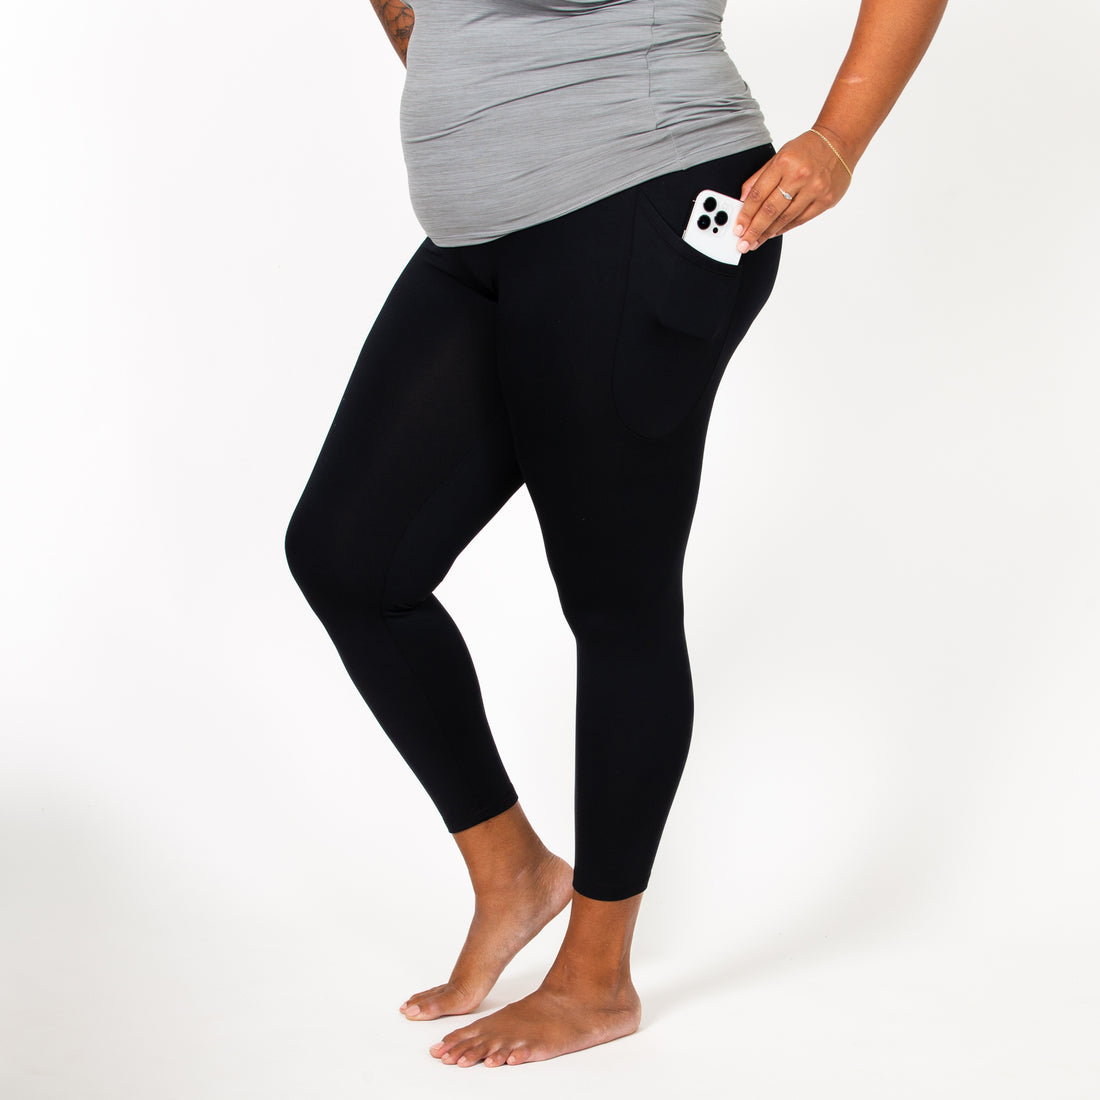 Cozy Leggings with Side Pocket – Smoothies Tank Tops